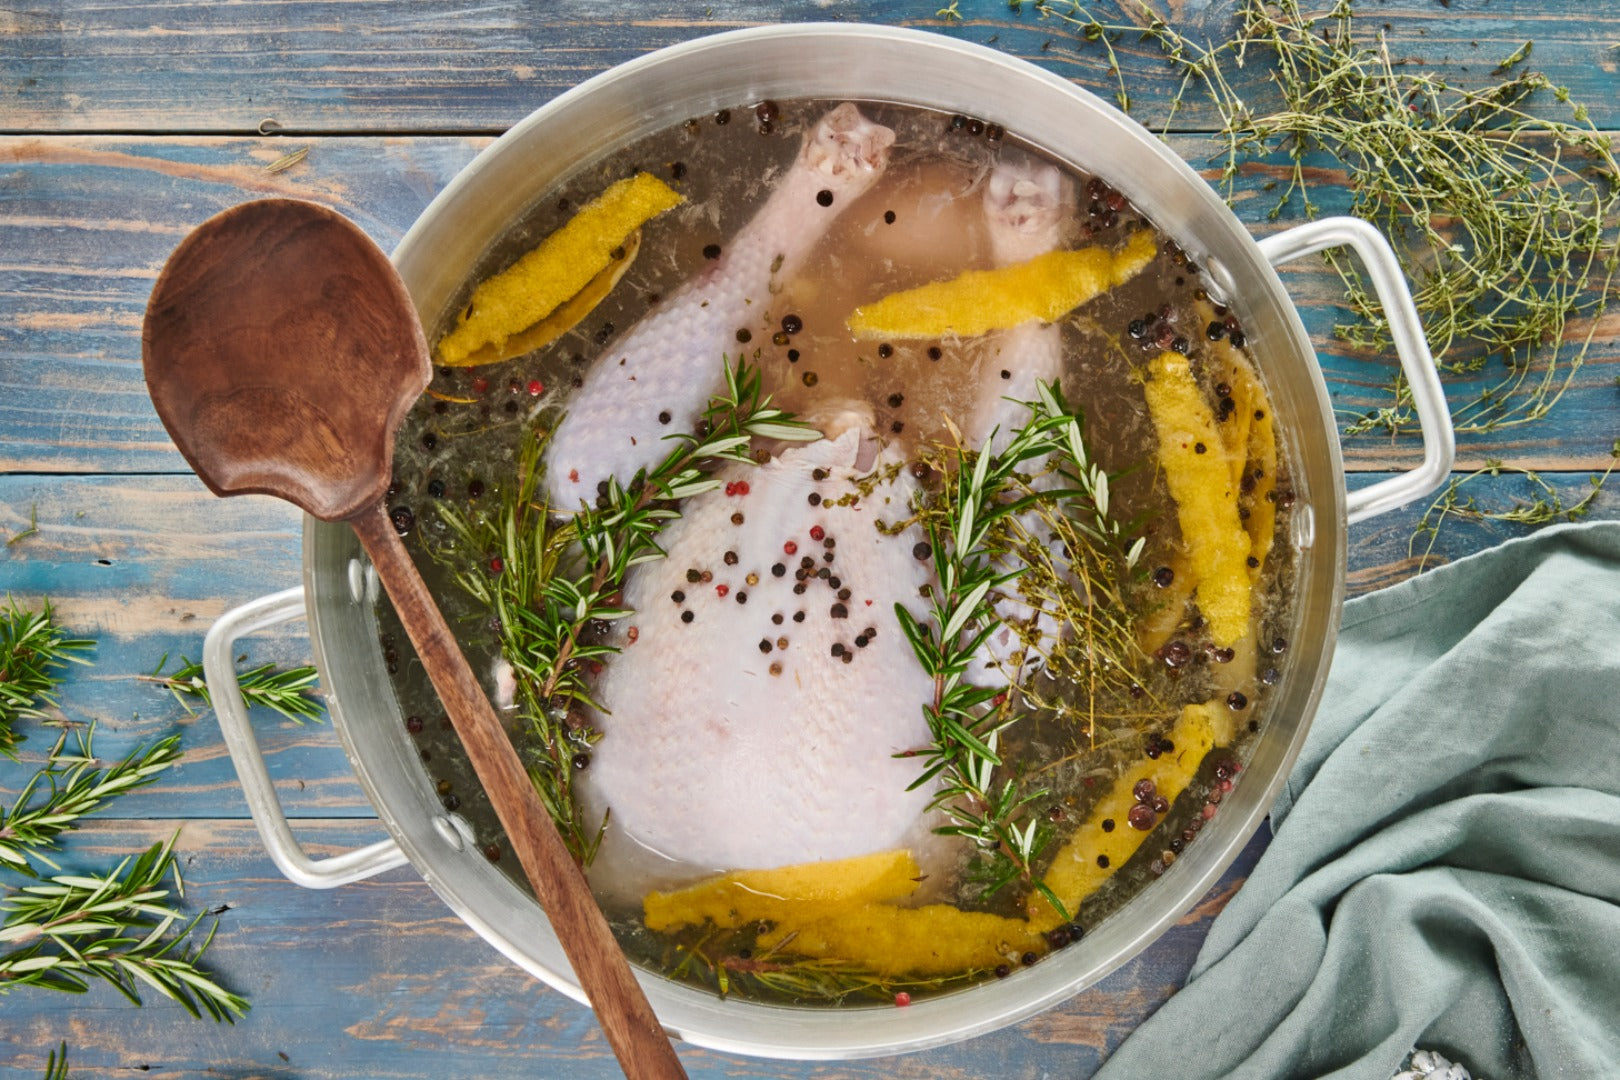 A Christmas turkey in a pot full of brine flavoured with spices, citrus and herbs